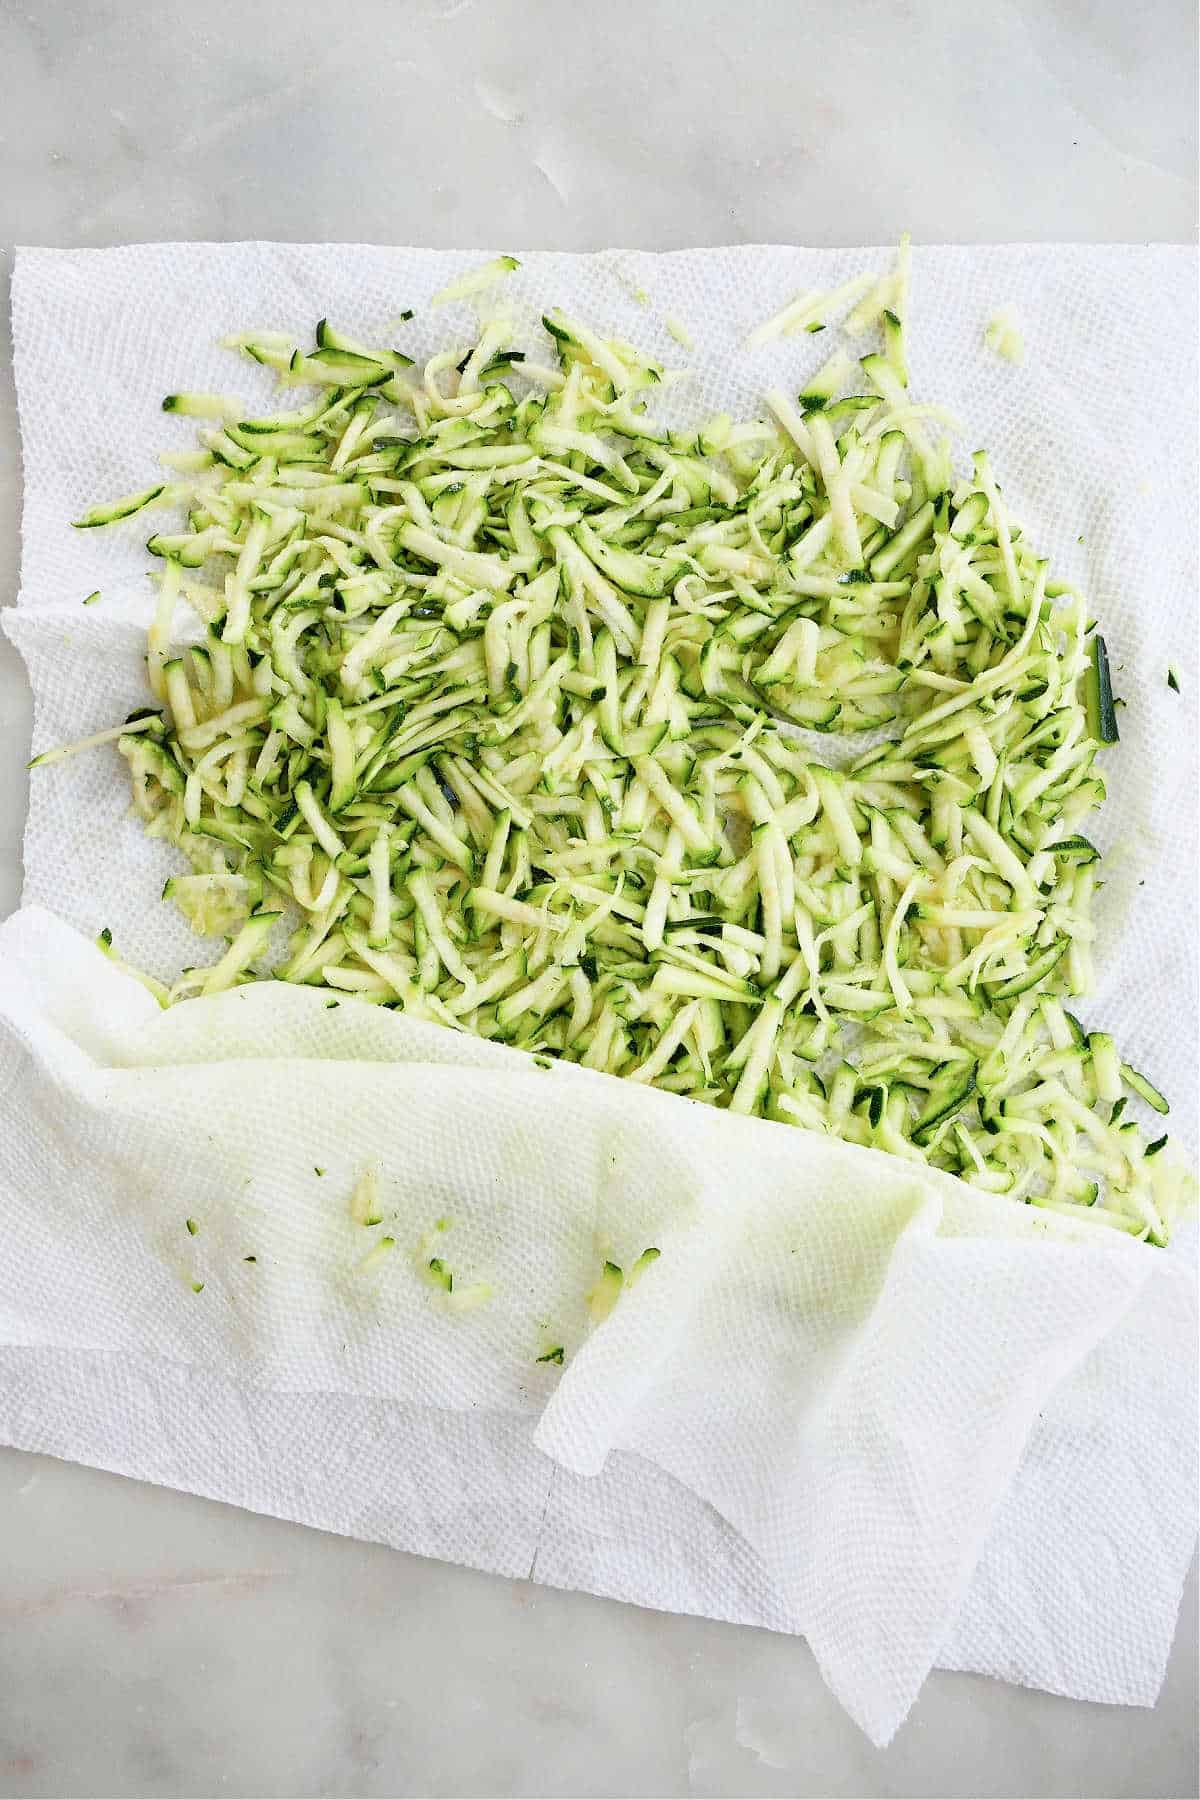 shredded zucchini being pressed in between two paper towels to remove water